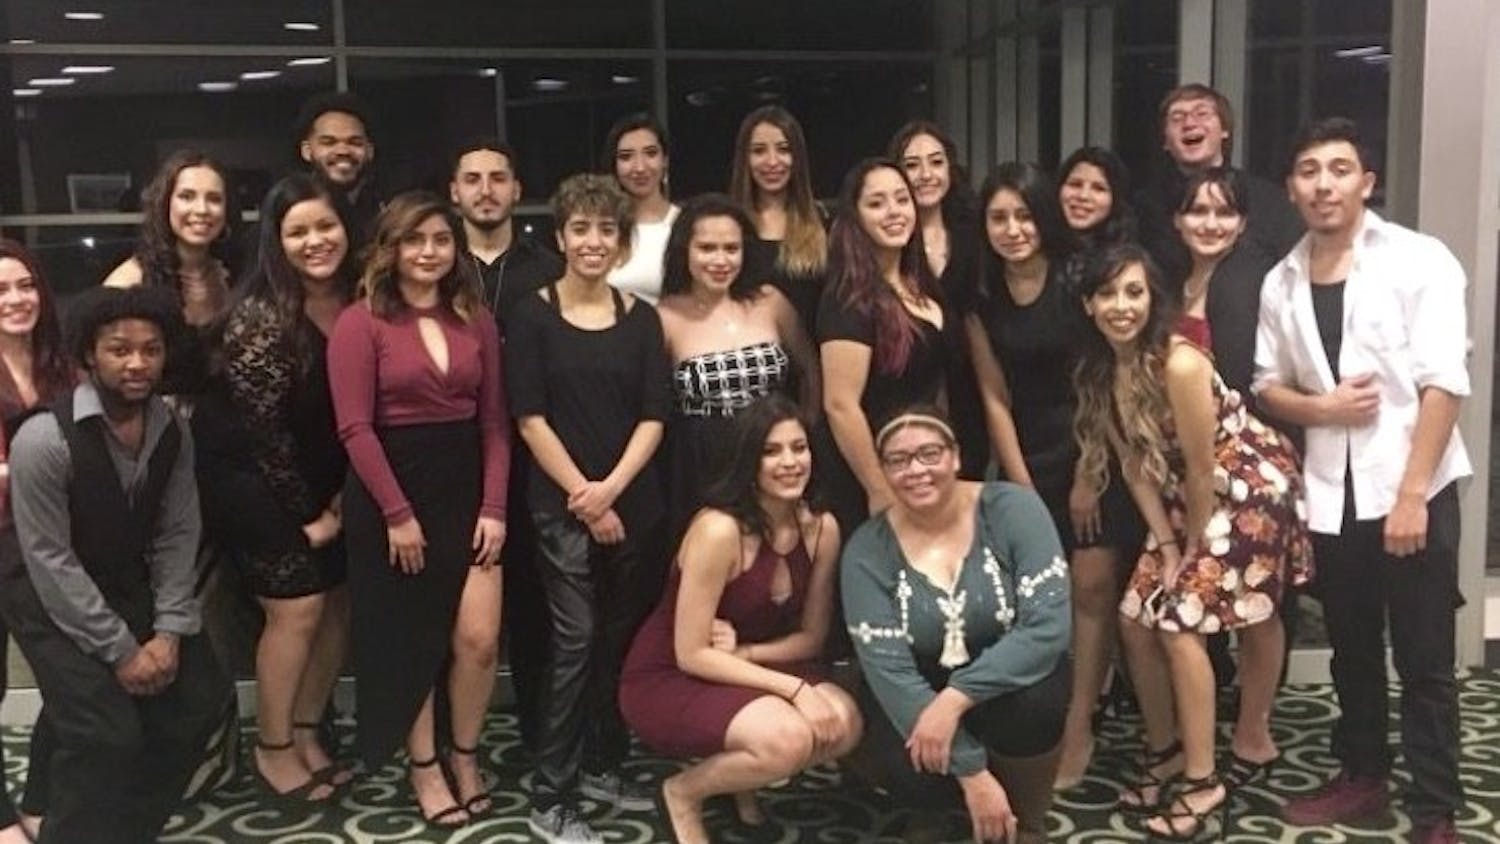 The LSA hosted their first Quinceañera last Friday.